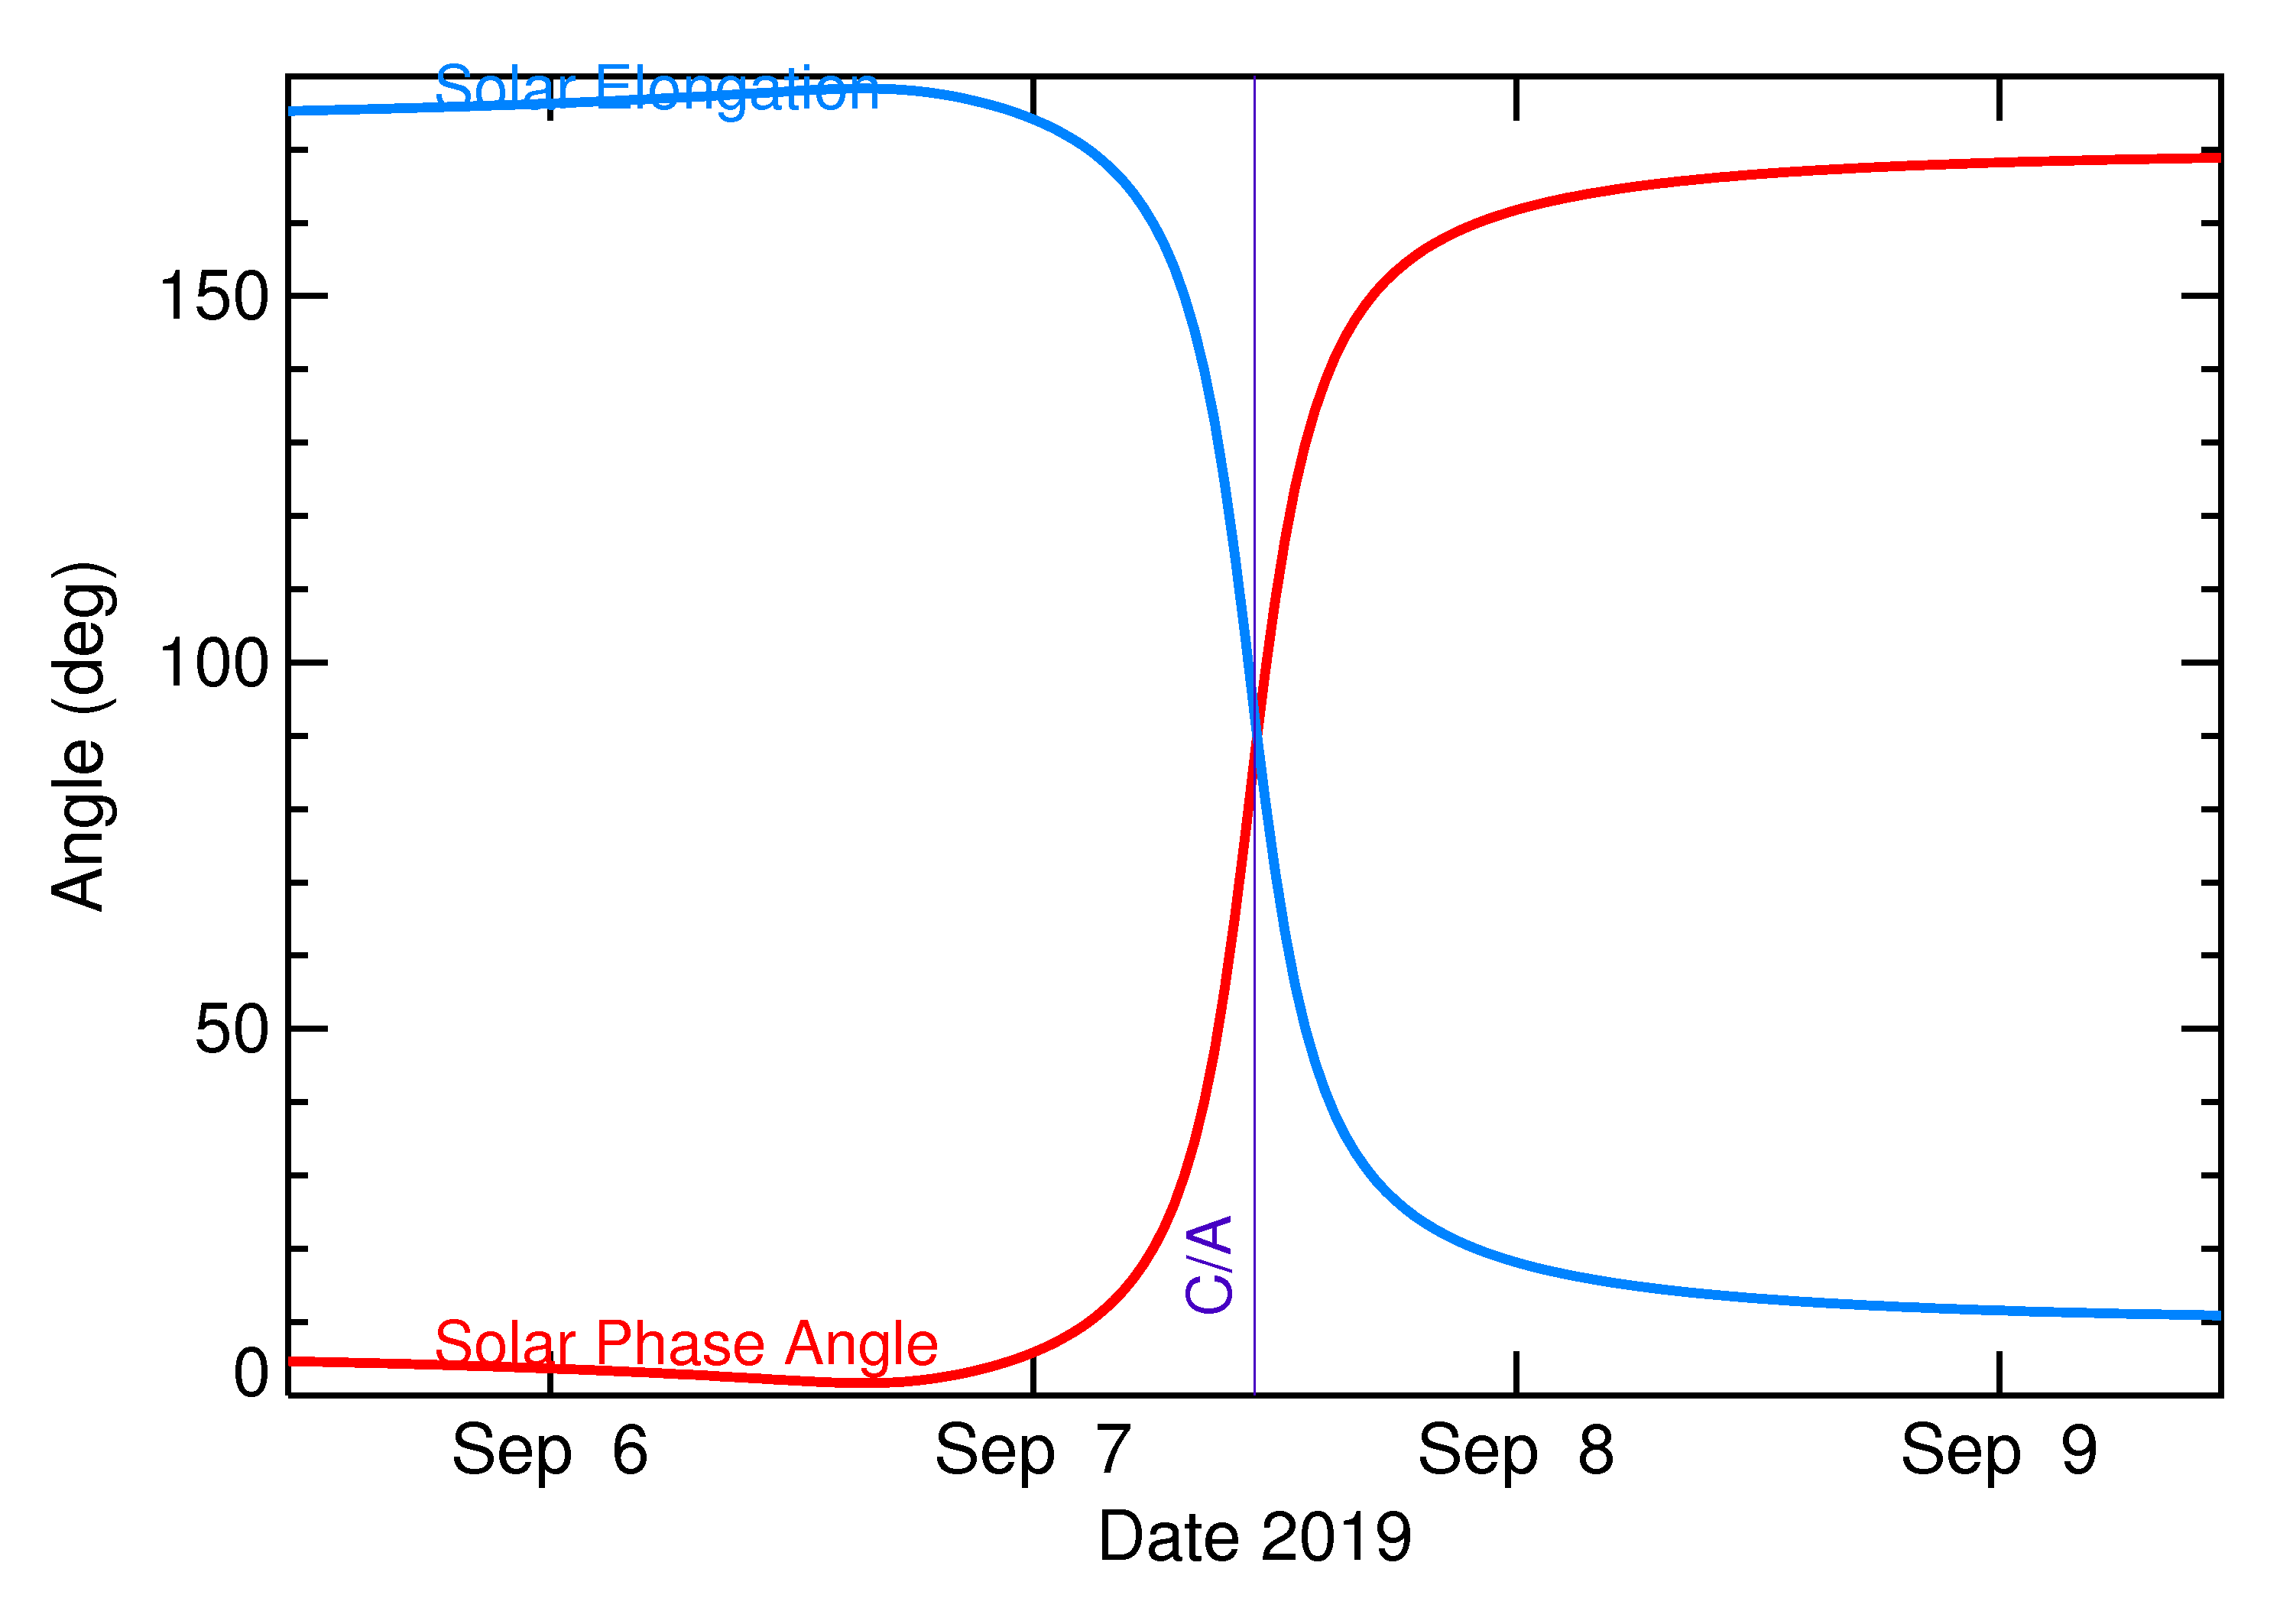 Solar Elongation and Solar Phase Angle of 2019 RC1 in the days around closest approach